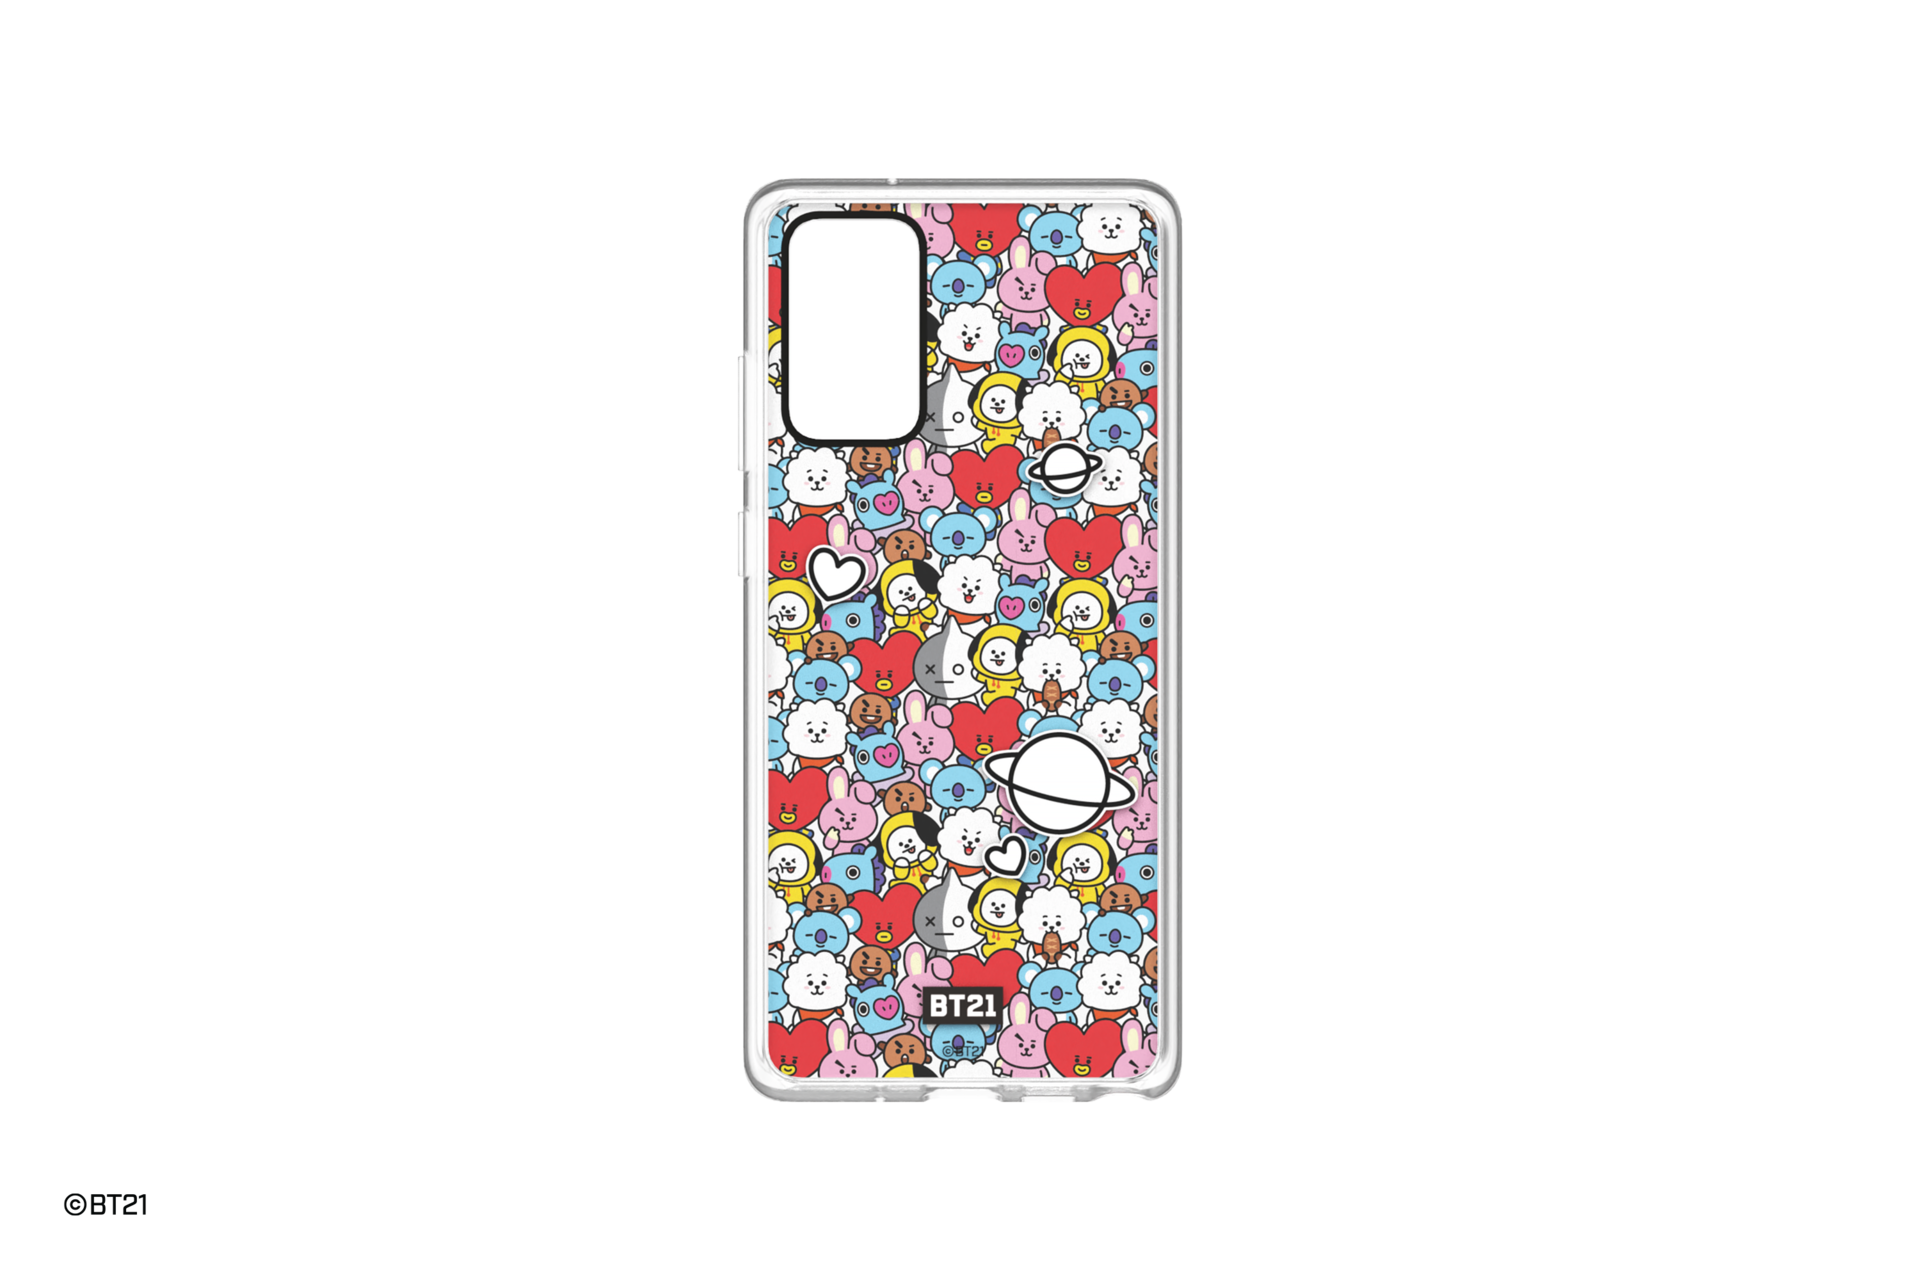 Bt21 Smart Cover For Galaxy Note Samsung Nz